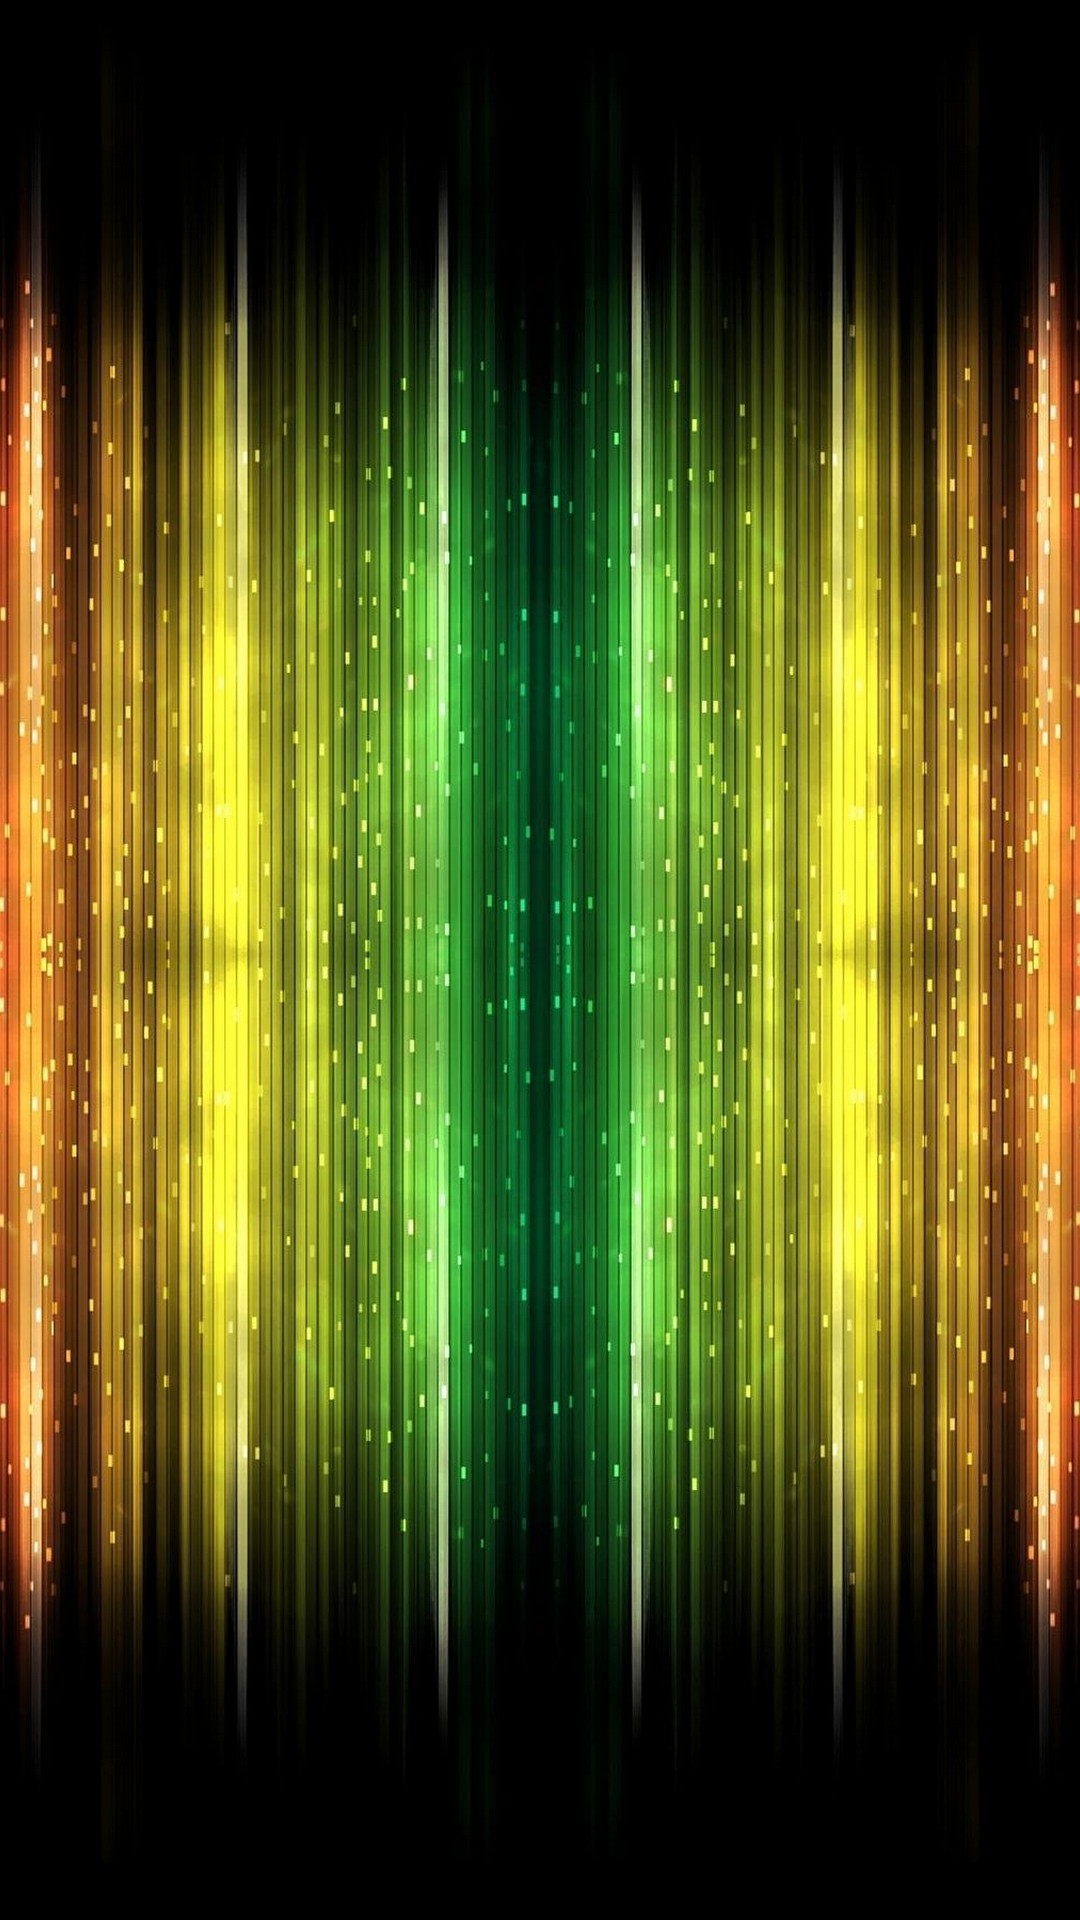 Rainbow Colors Wallpaper For iPhone with image resolution 1080x1920 pixel. You can make this wallpaper for your iPhone 5, 6, 7, 8, X backgrounds, Mobile Screensaver, or iPad Lock Screen